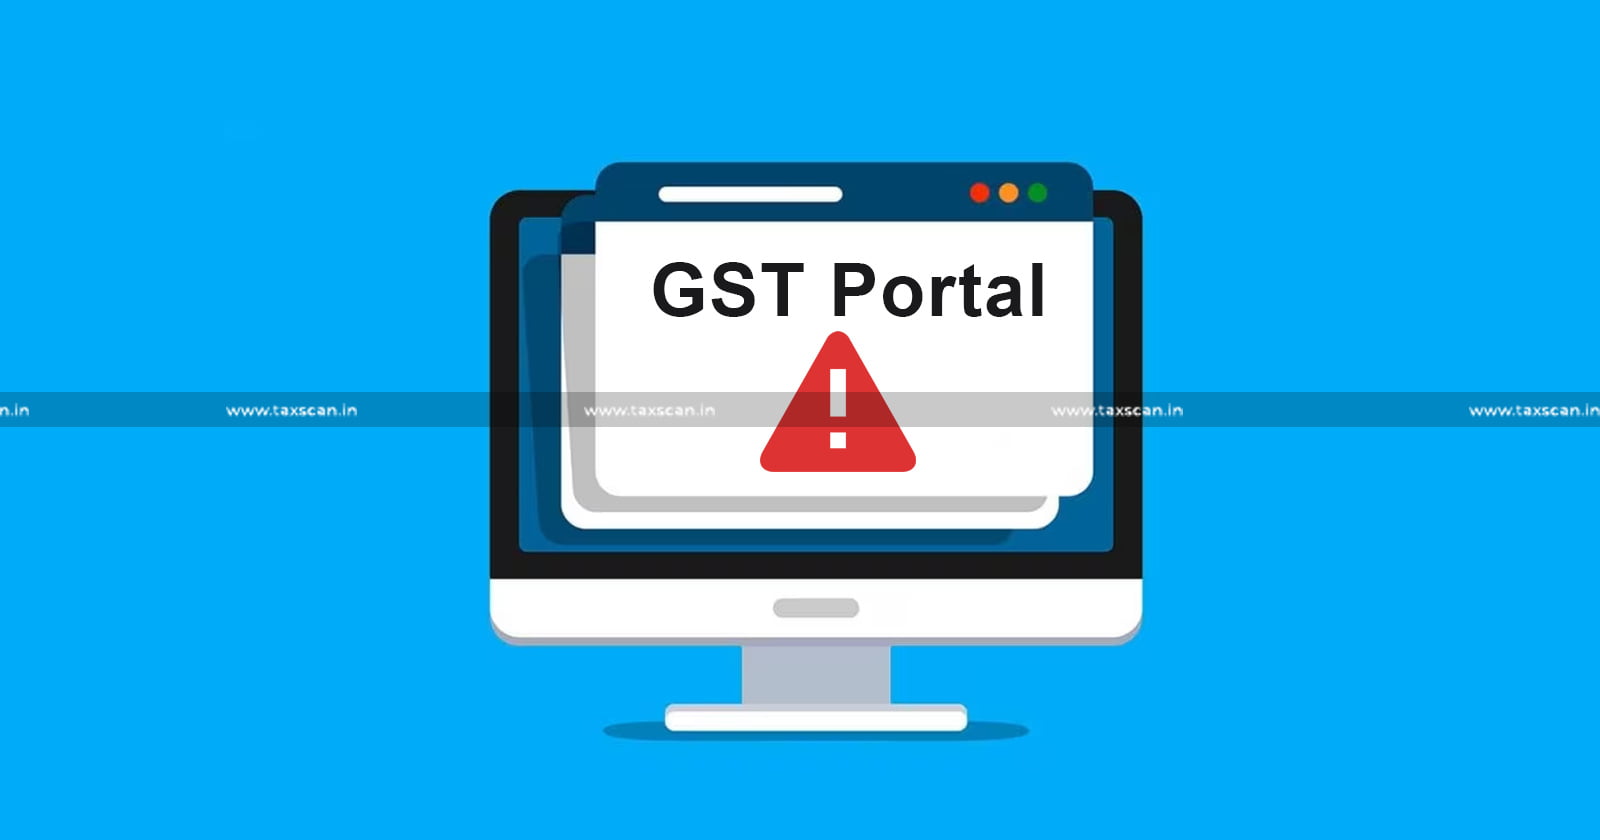 GST Portal Crashed - filing of GSTR-1 - GSTR-1 - Twitter Flooded with Complaints from Tax Professionals - Twitter Flooded - Tax Professionals - taxscan